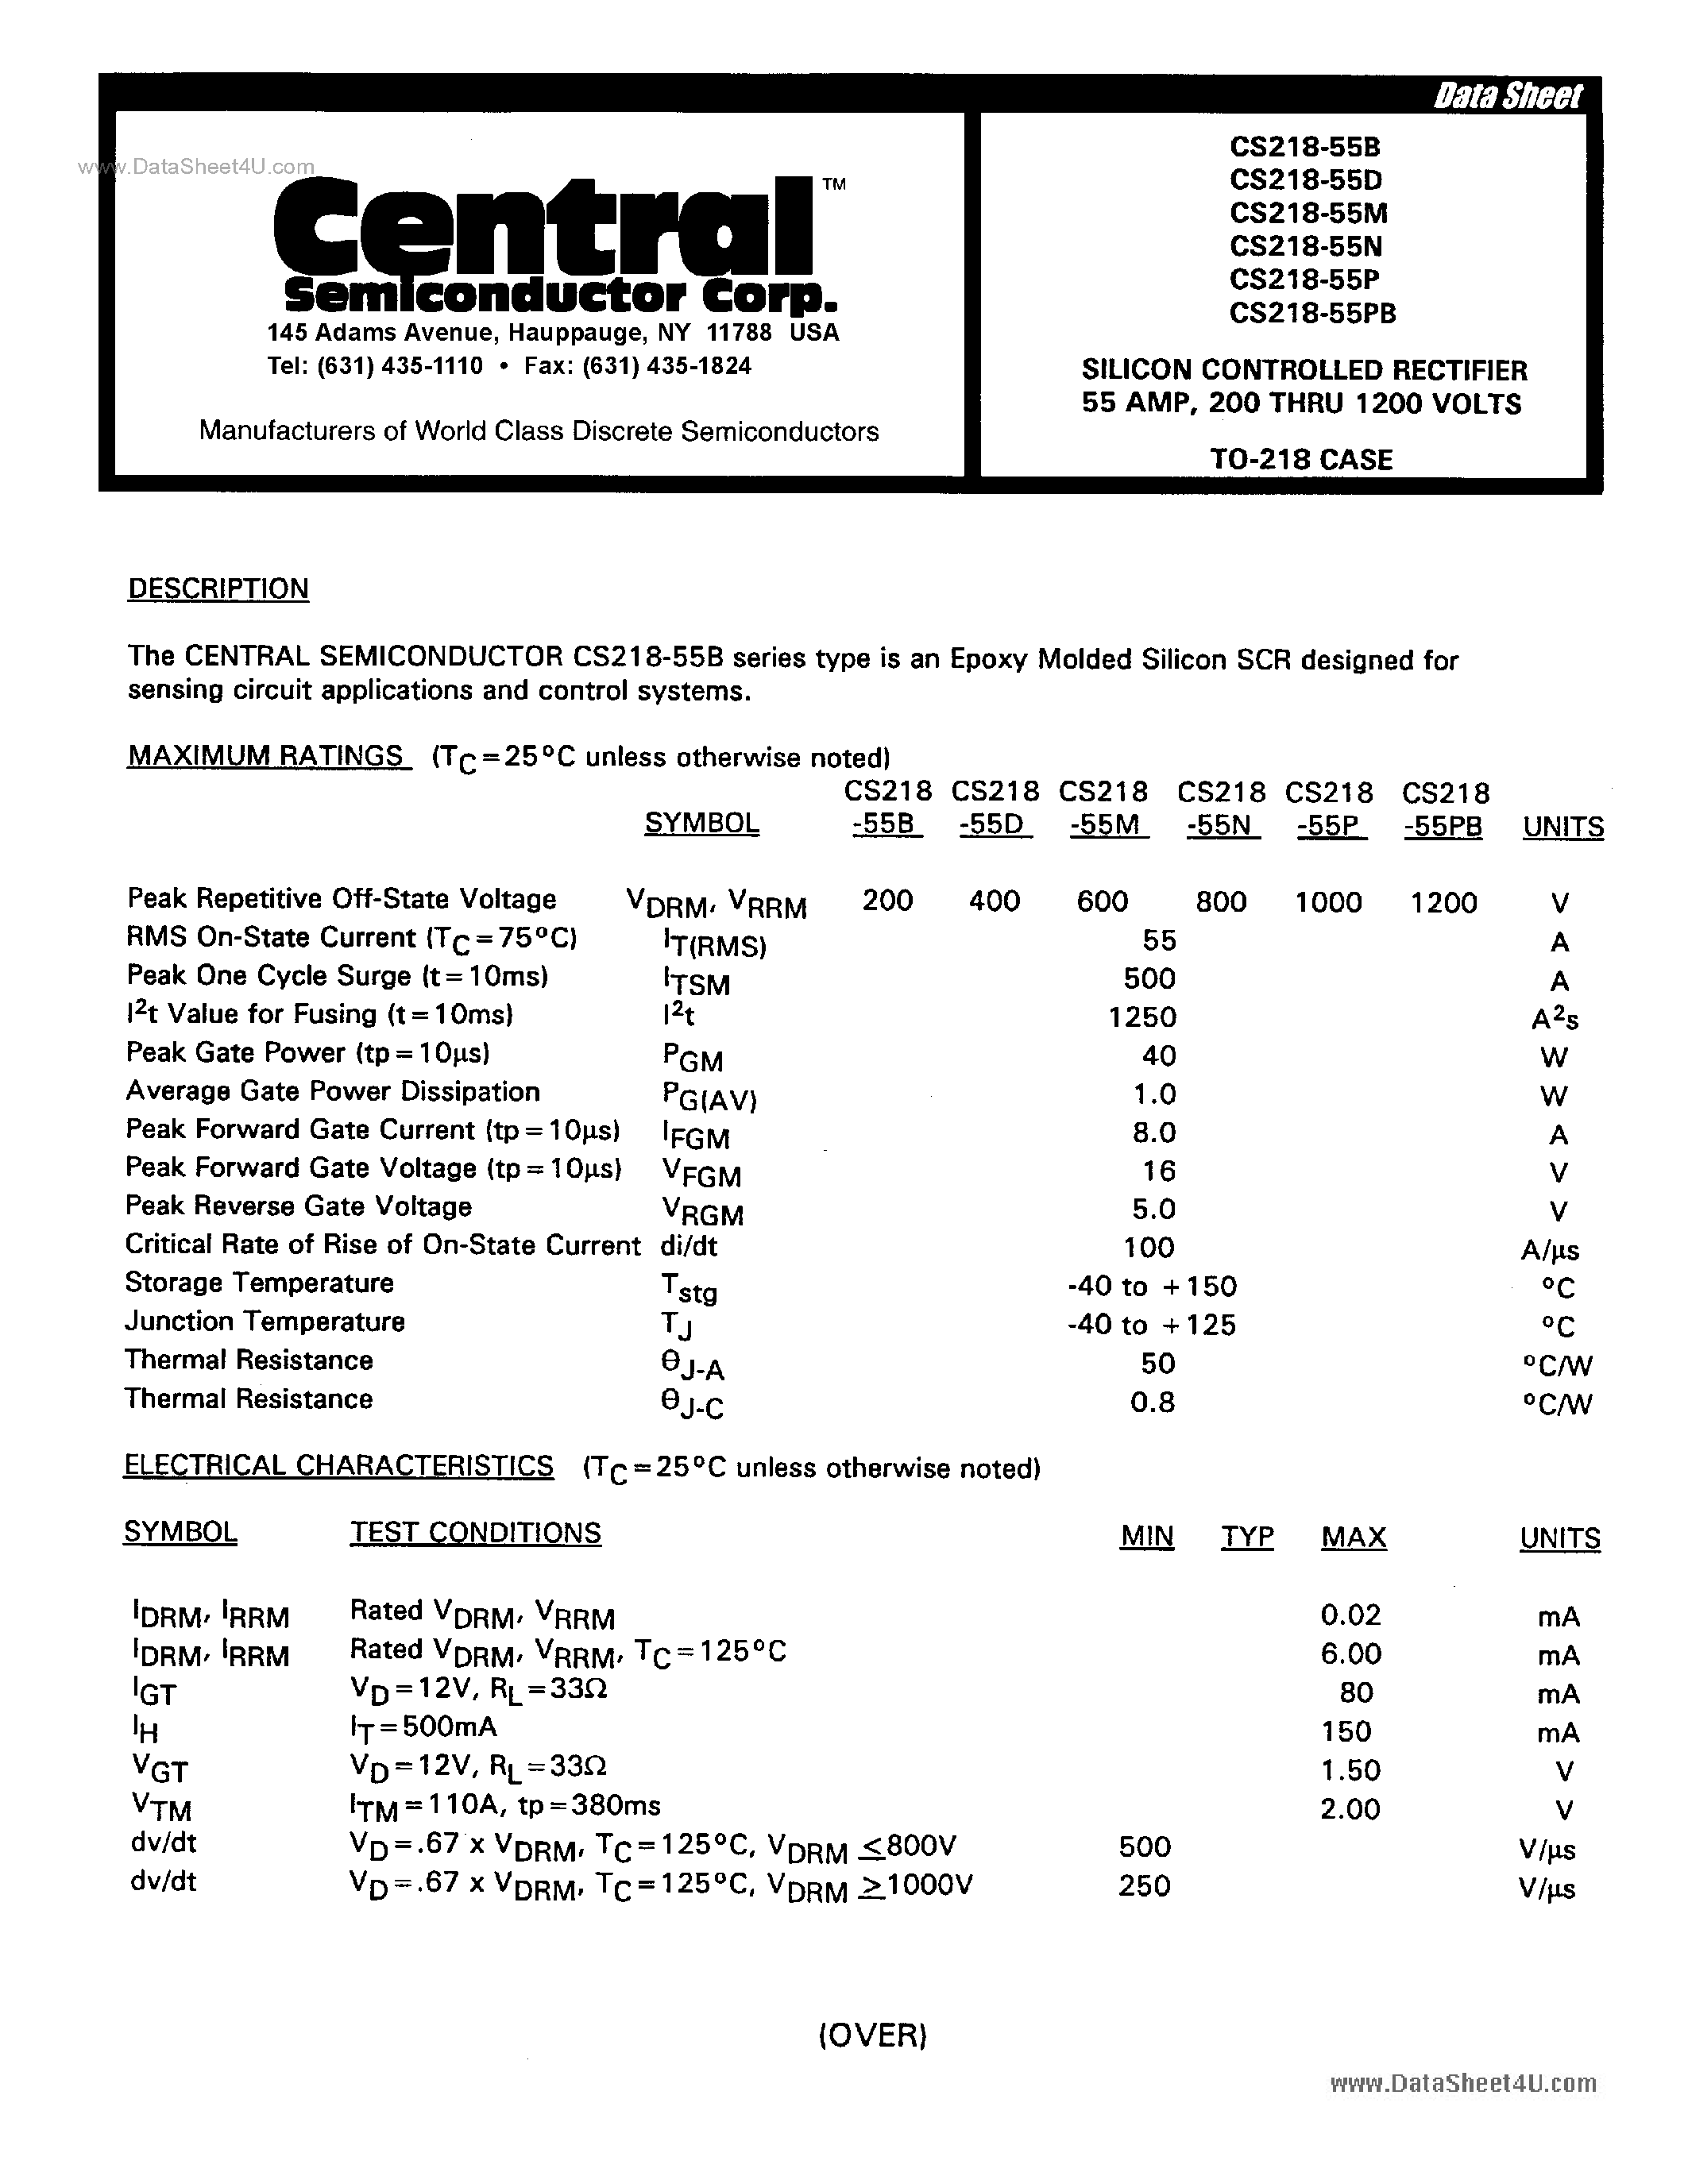 Datasheet CS218-55x - SILICON CONTROLLED RECTIFIER page 1